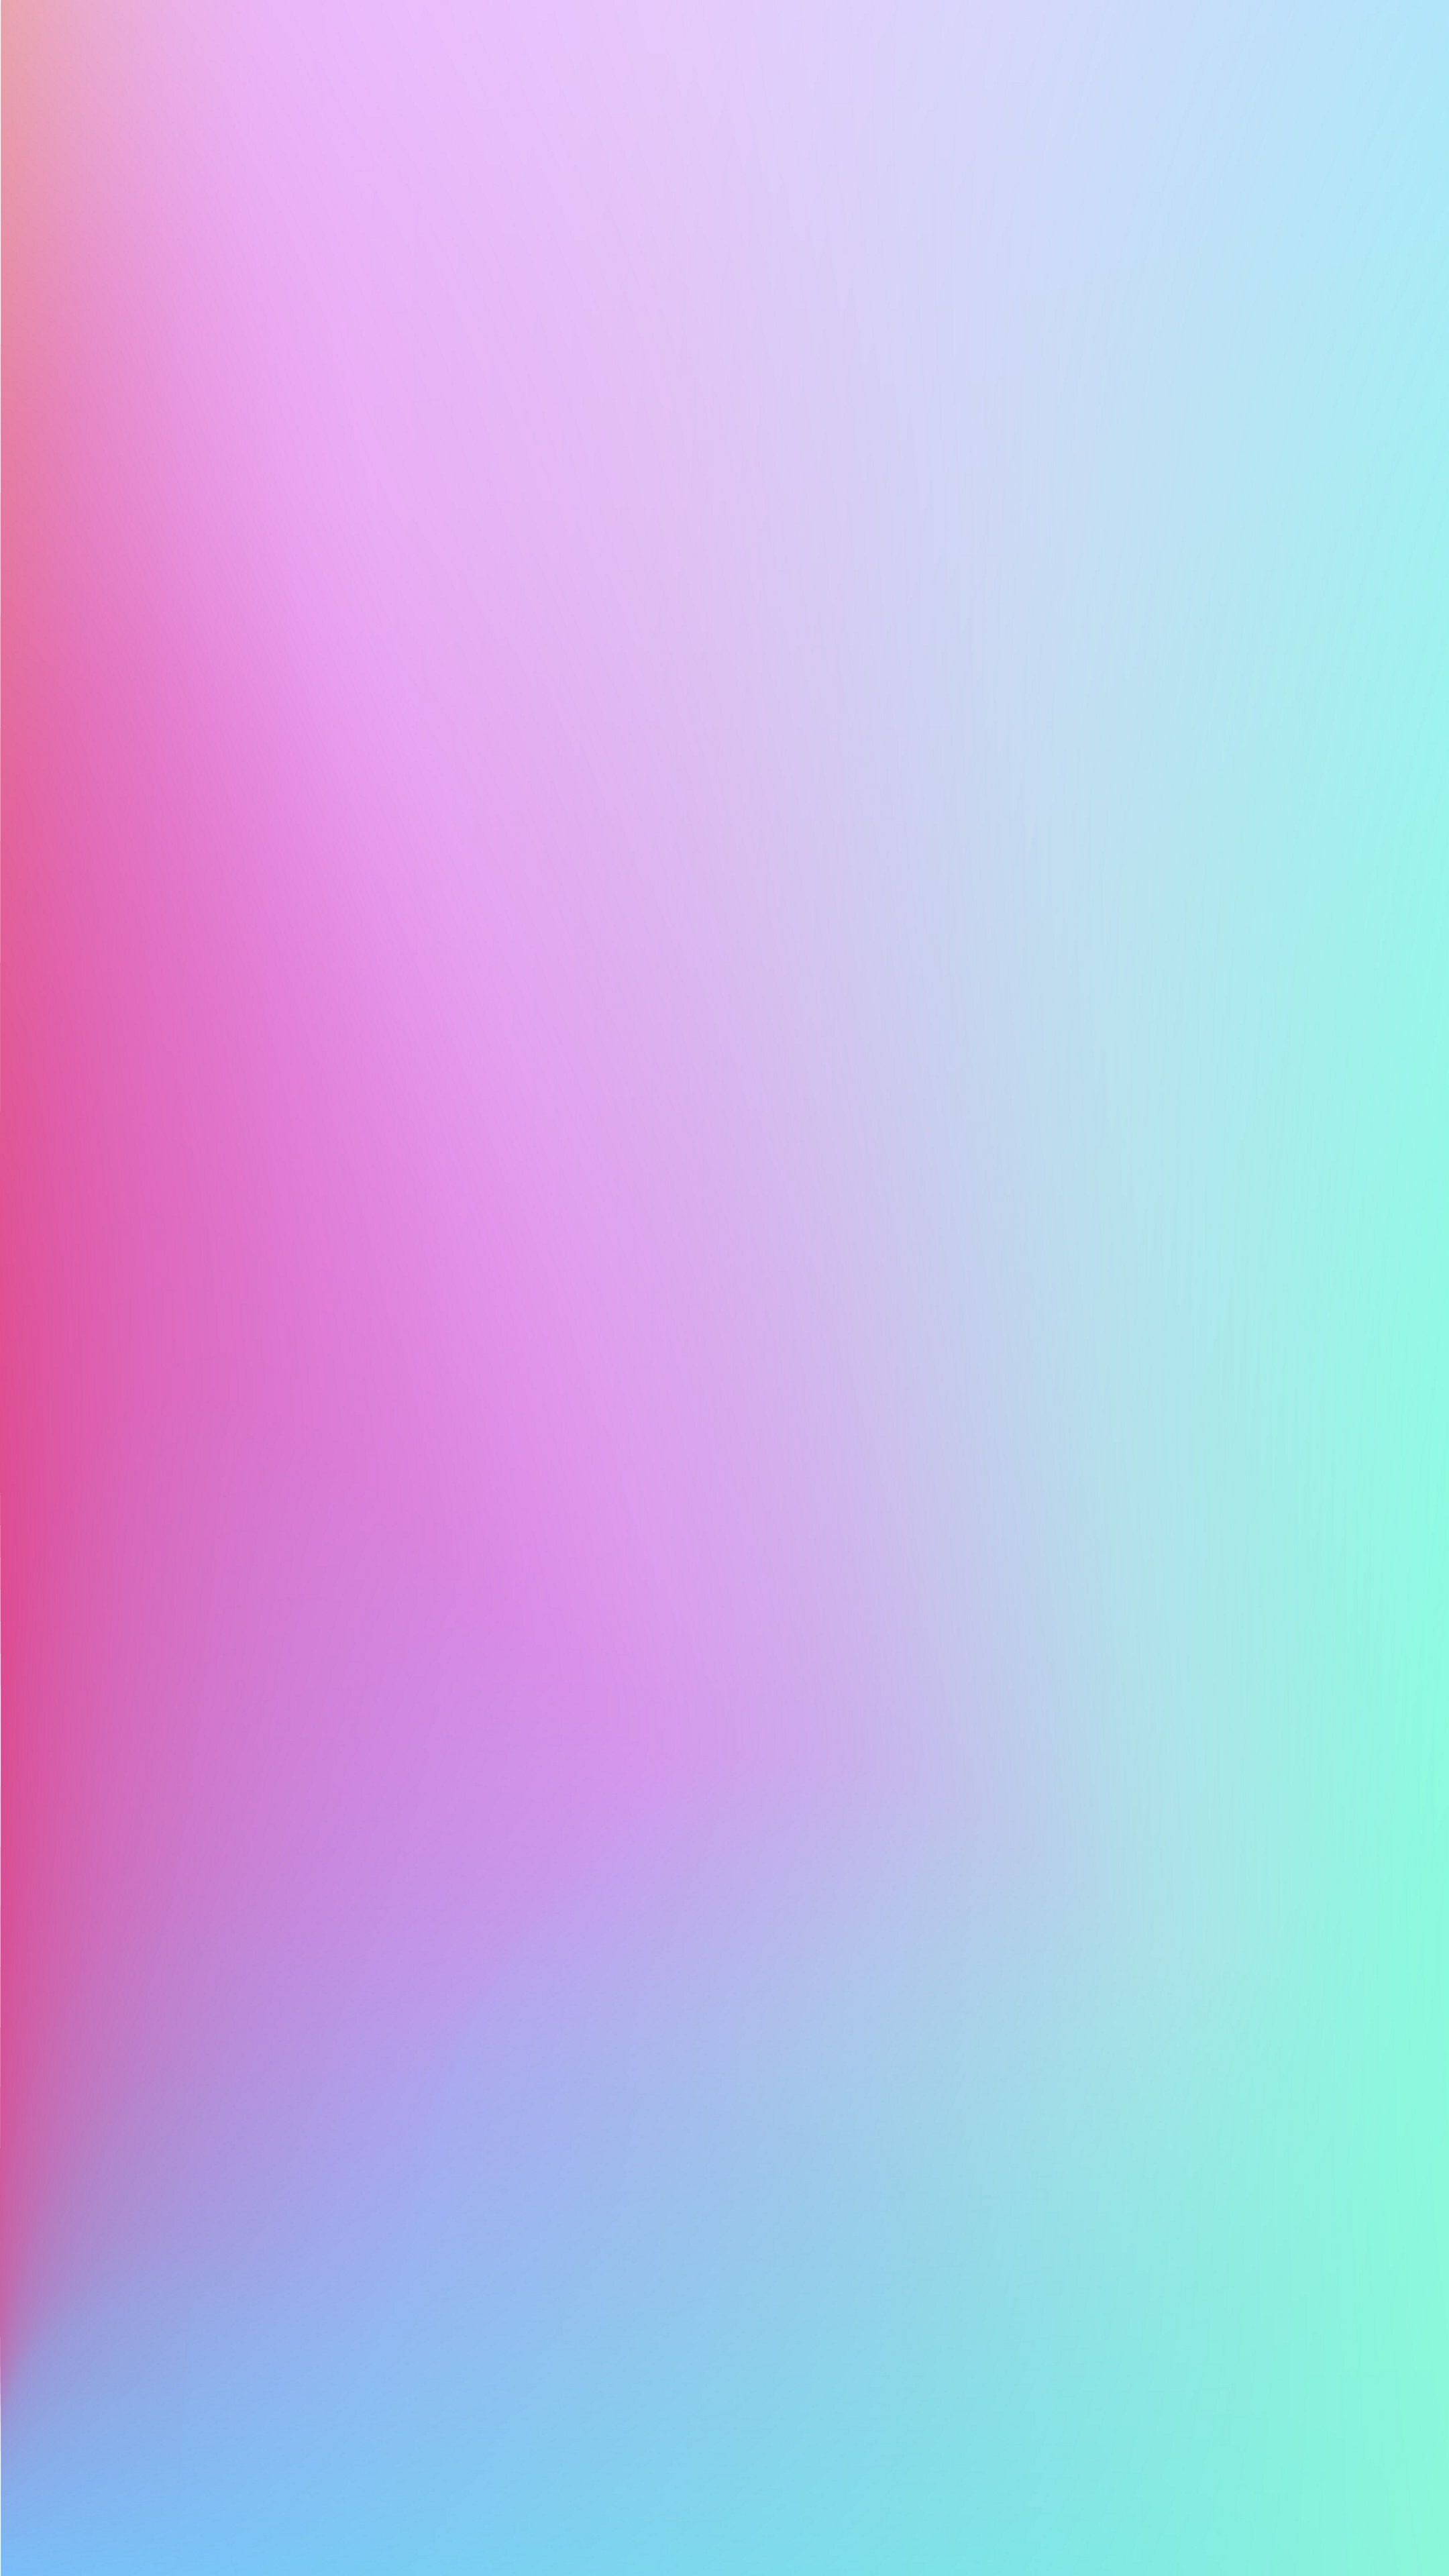 Light blue gradient wallpapers, Top free backgrounds, Serene ambiance, Tranquil tones, 2160x3840 4K Phone